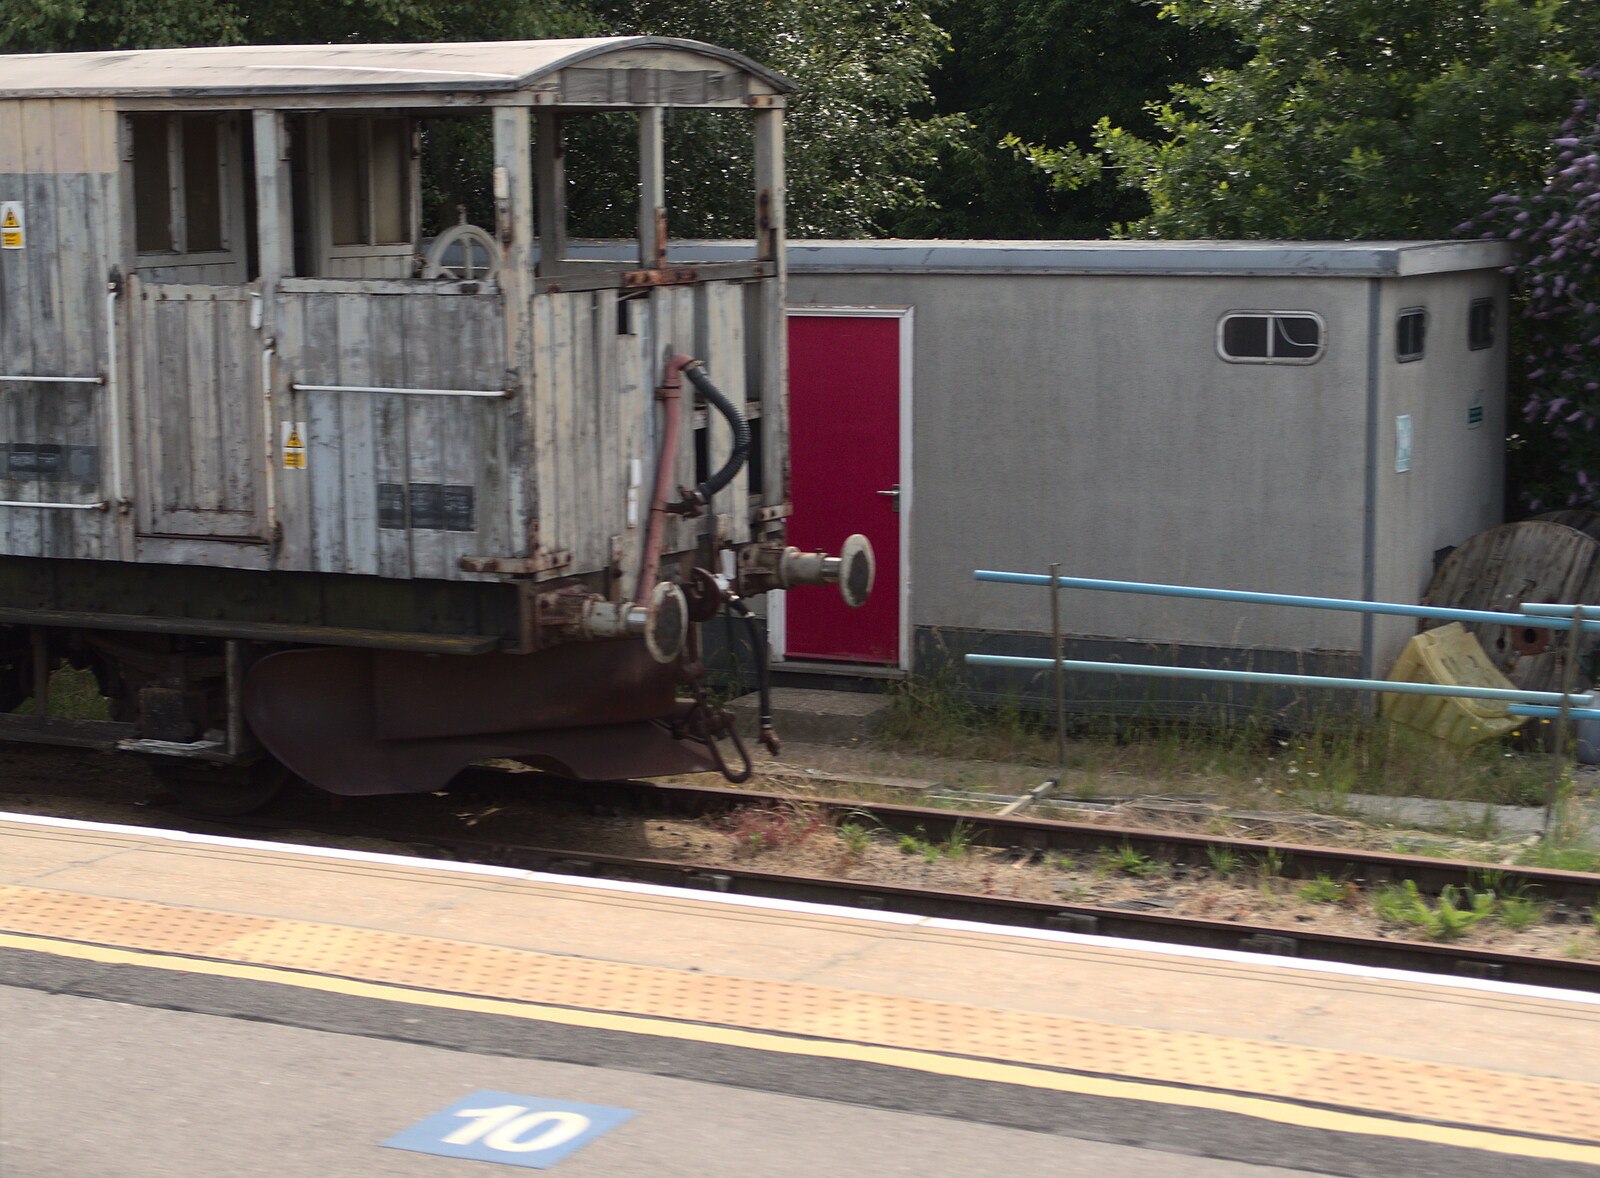 A glimpse of an old brake wagon at Shenfield from The Demolition of the Garage, Brome, Suffolk - 17th July 2013